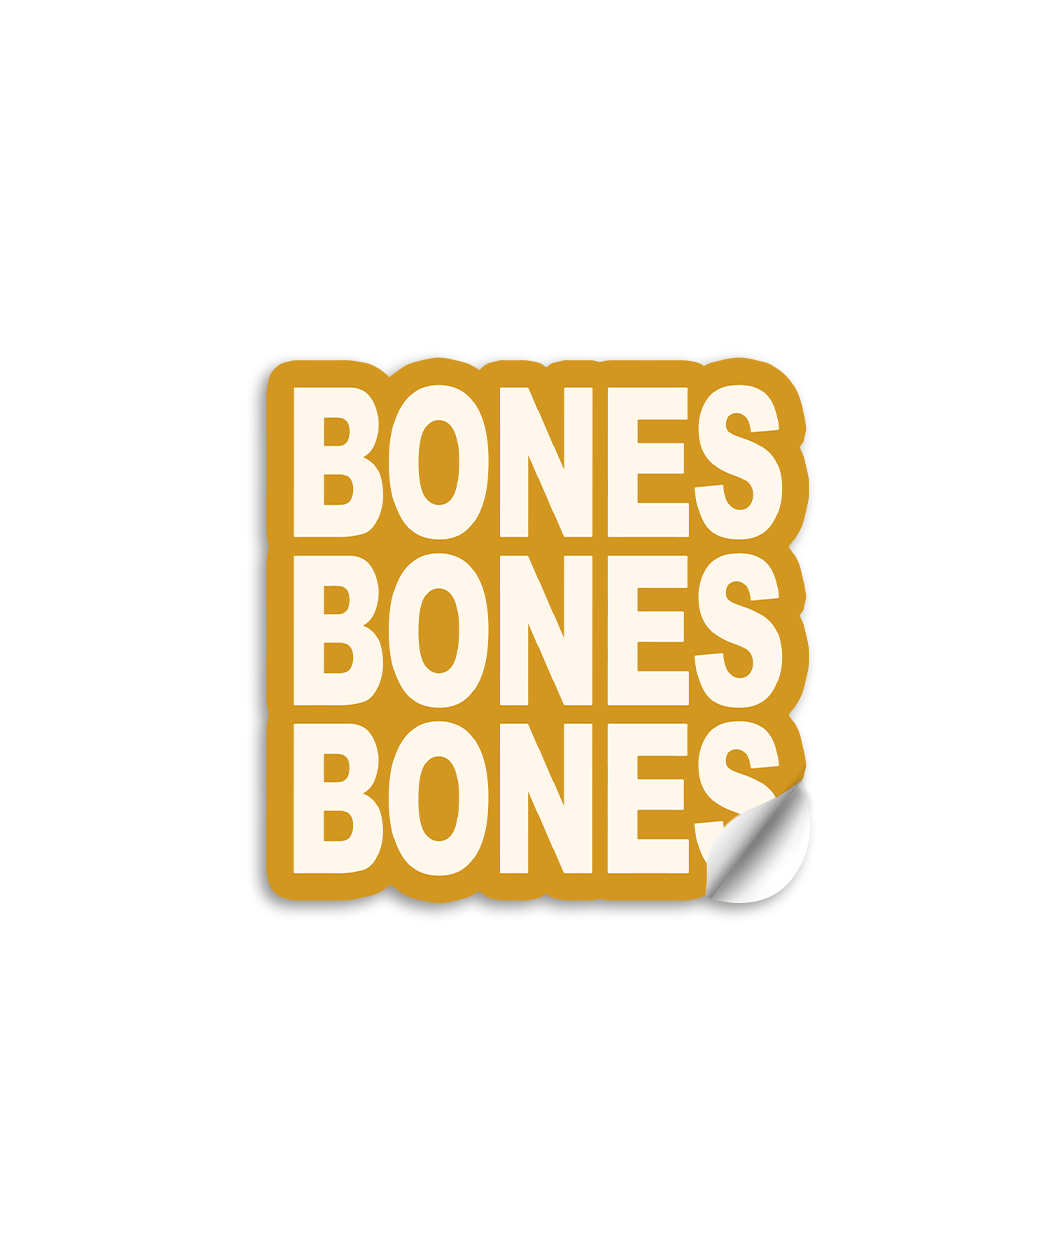 3" vinyl die cut sticker with bold block text. And a  mustard colored sticker with off white text reads, "BONES BONES BONES".